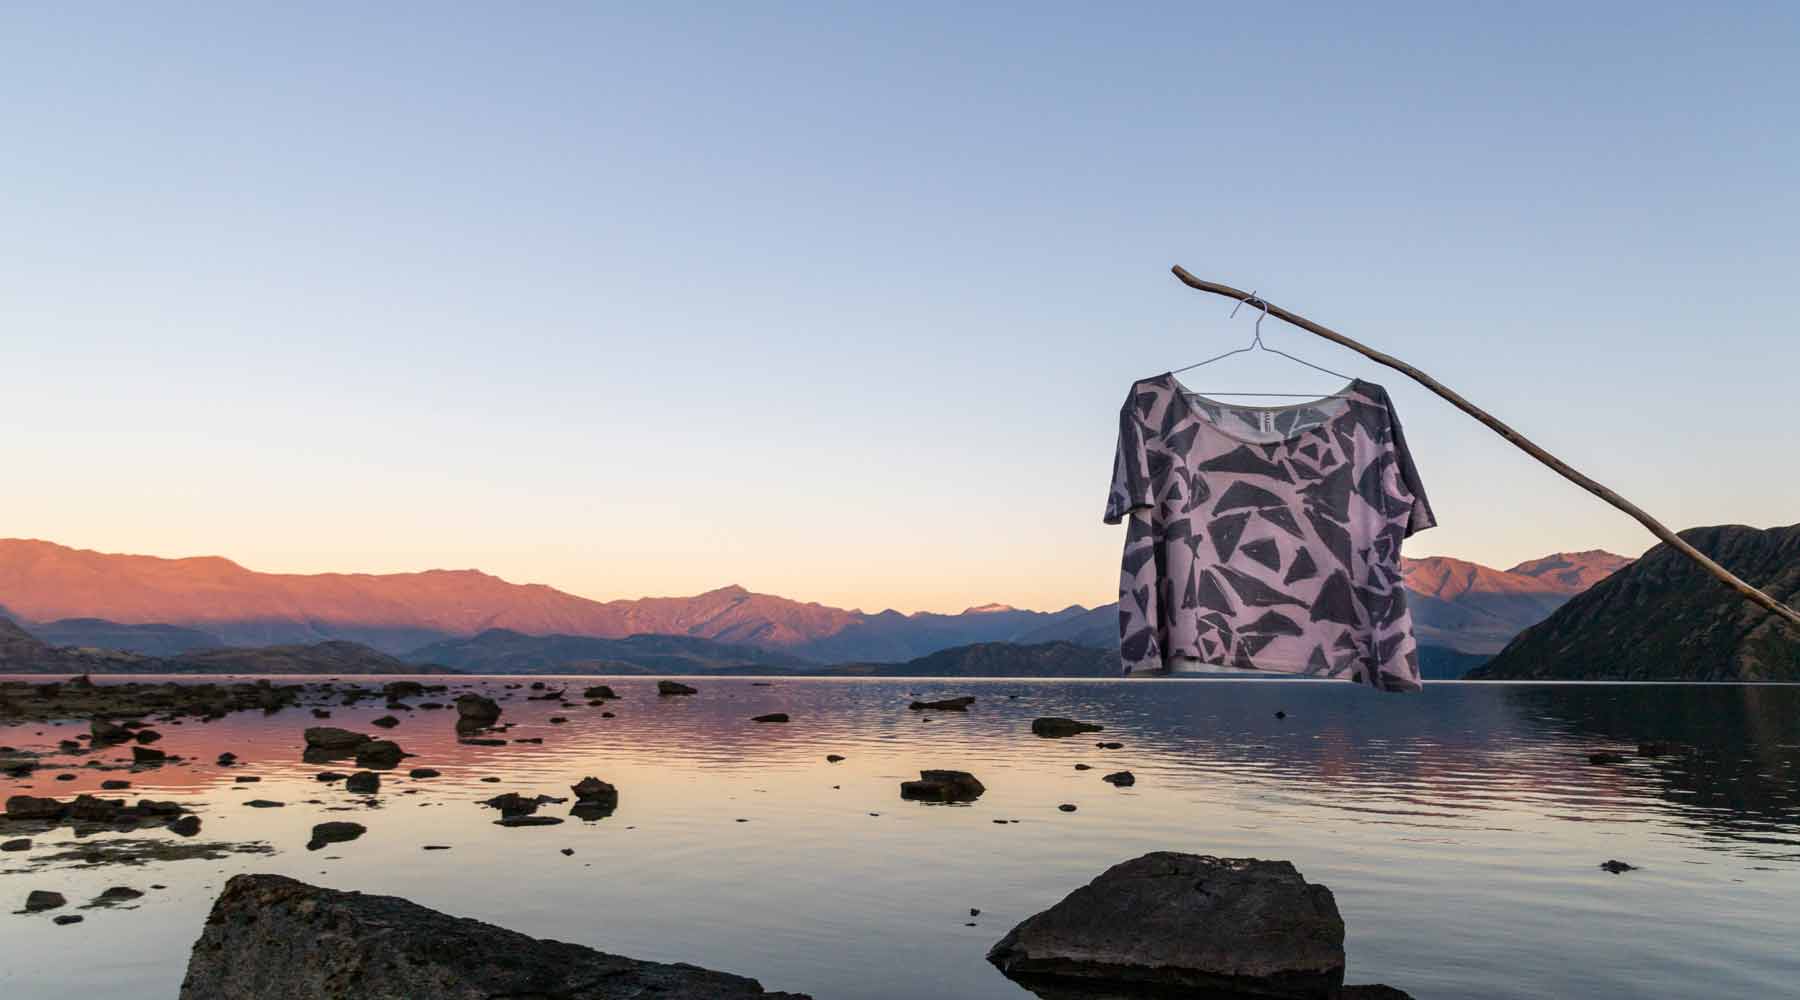 Asmuss Black Rose Tshirt on a coat hanger hung off a stick above the still water and rocks of Lake Wanaka while the sun rises on the mountains in the distance